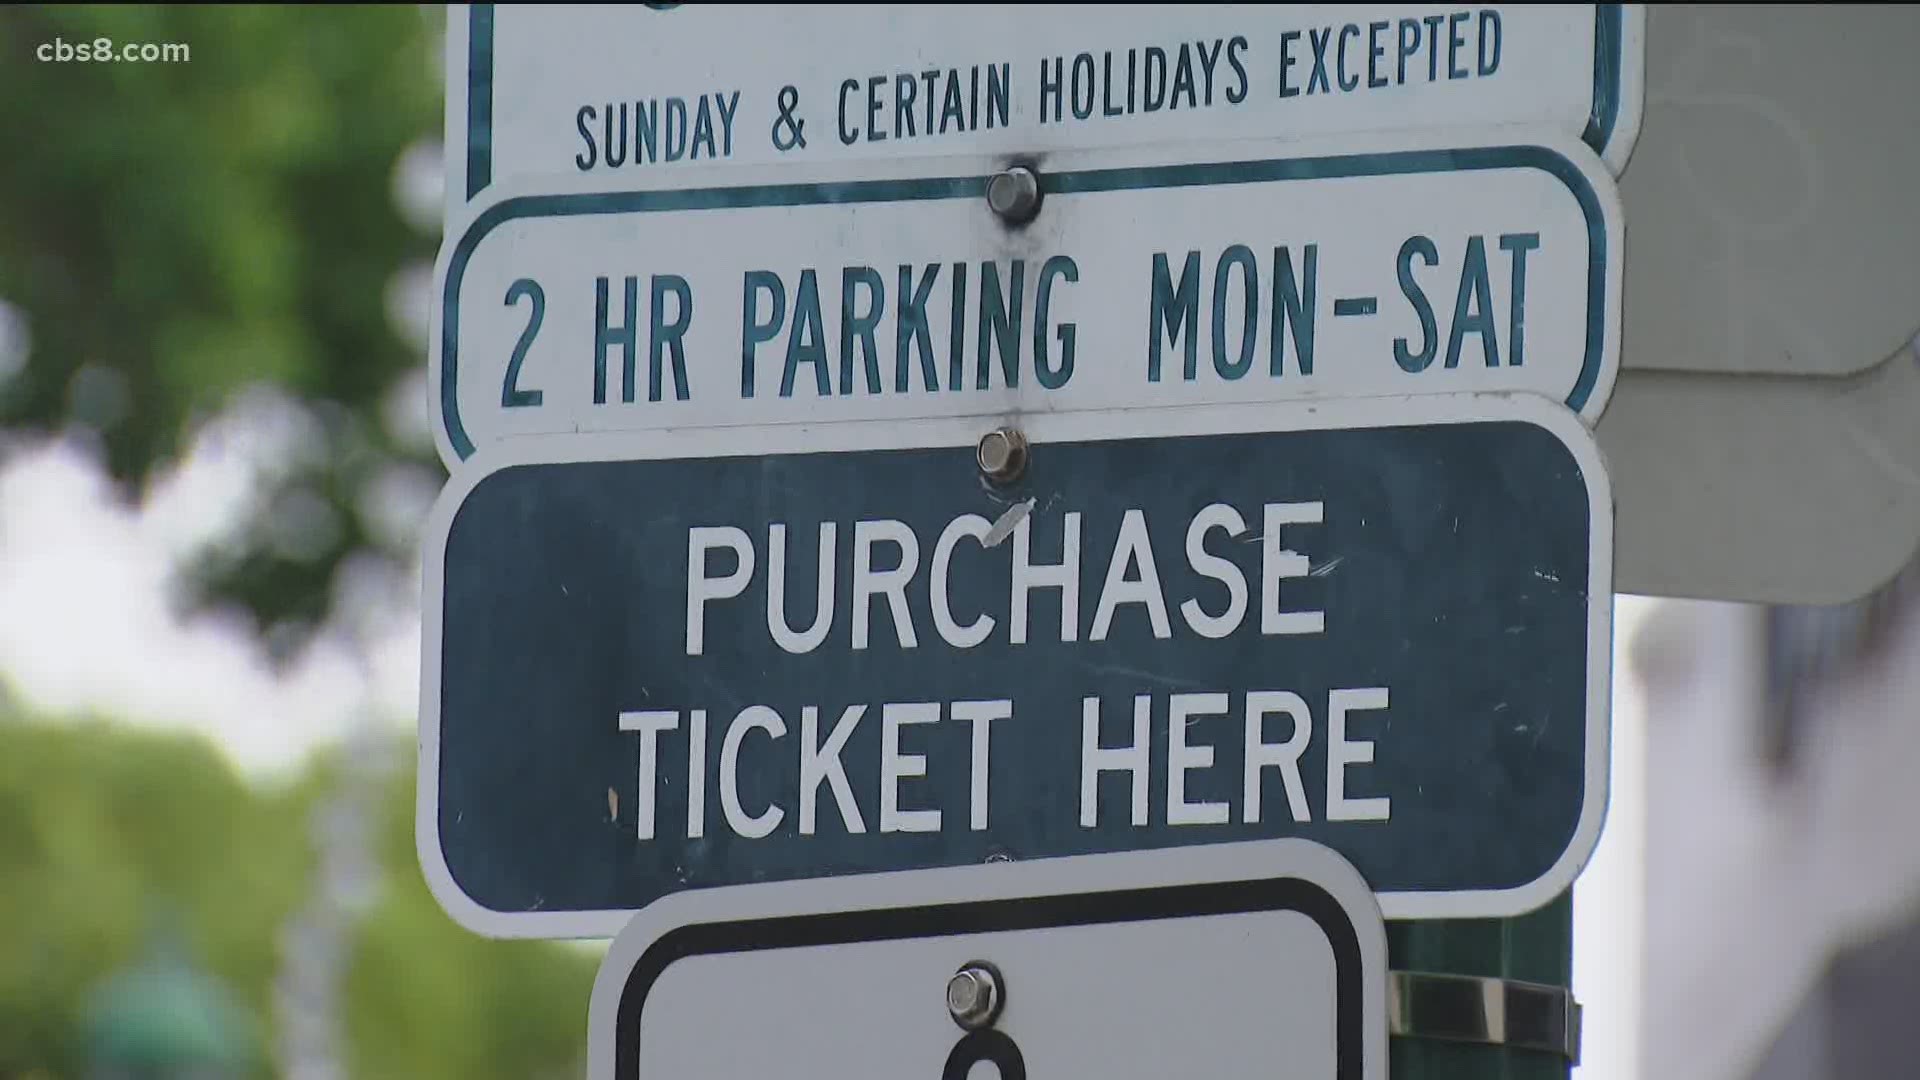 The city suspended parking enforcement back in March following the COVID-19 stay-at-home order, but now, with businesses re-opening, parking tickets will return.